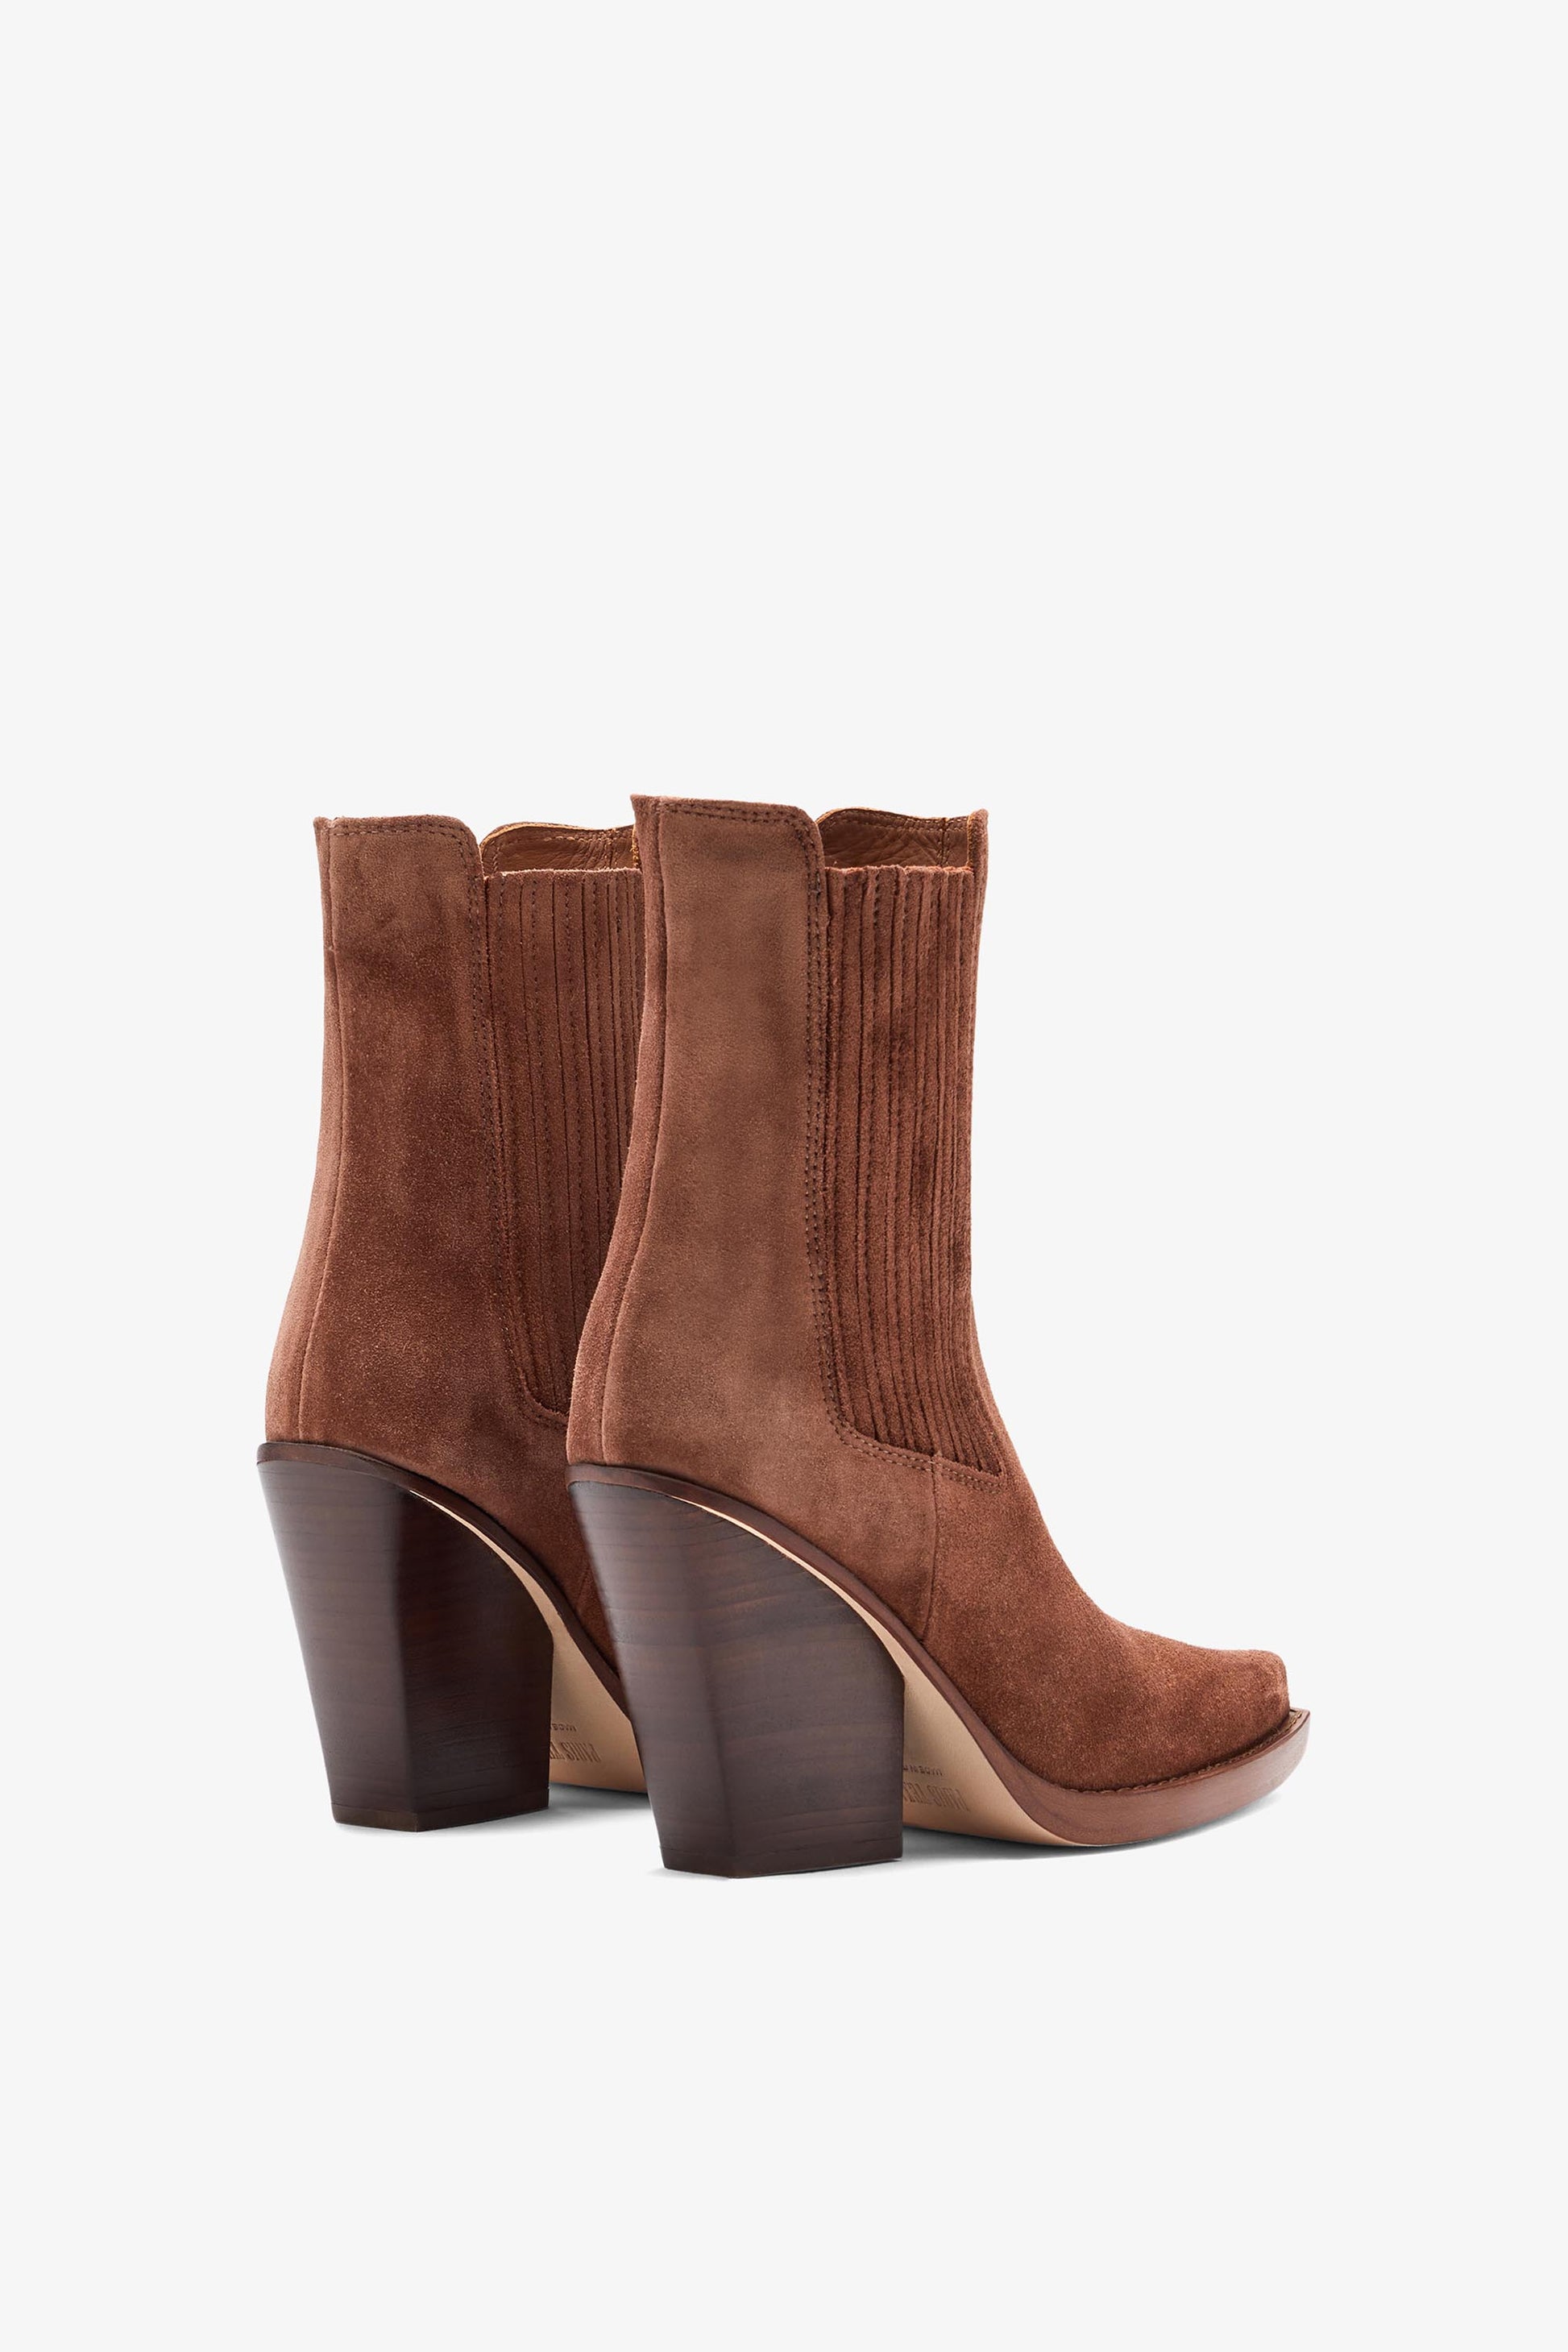 Canyon brown calf suede ankle boots